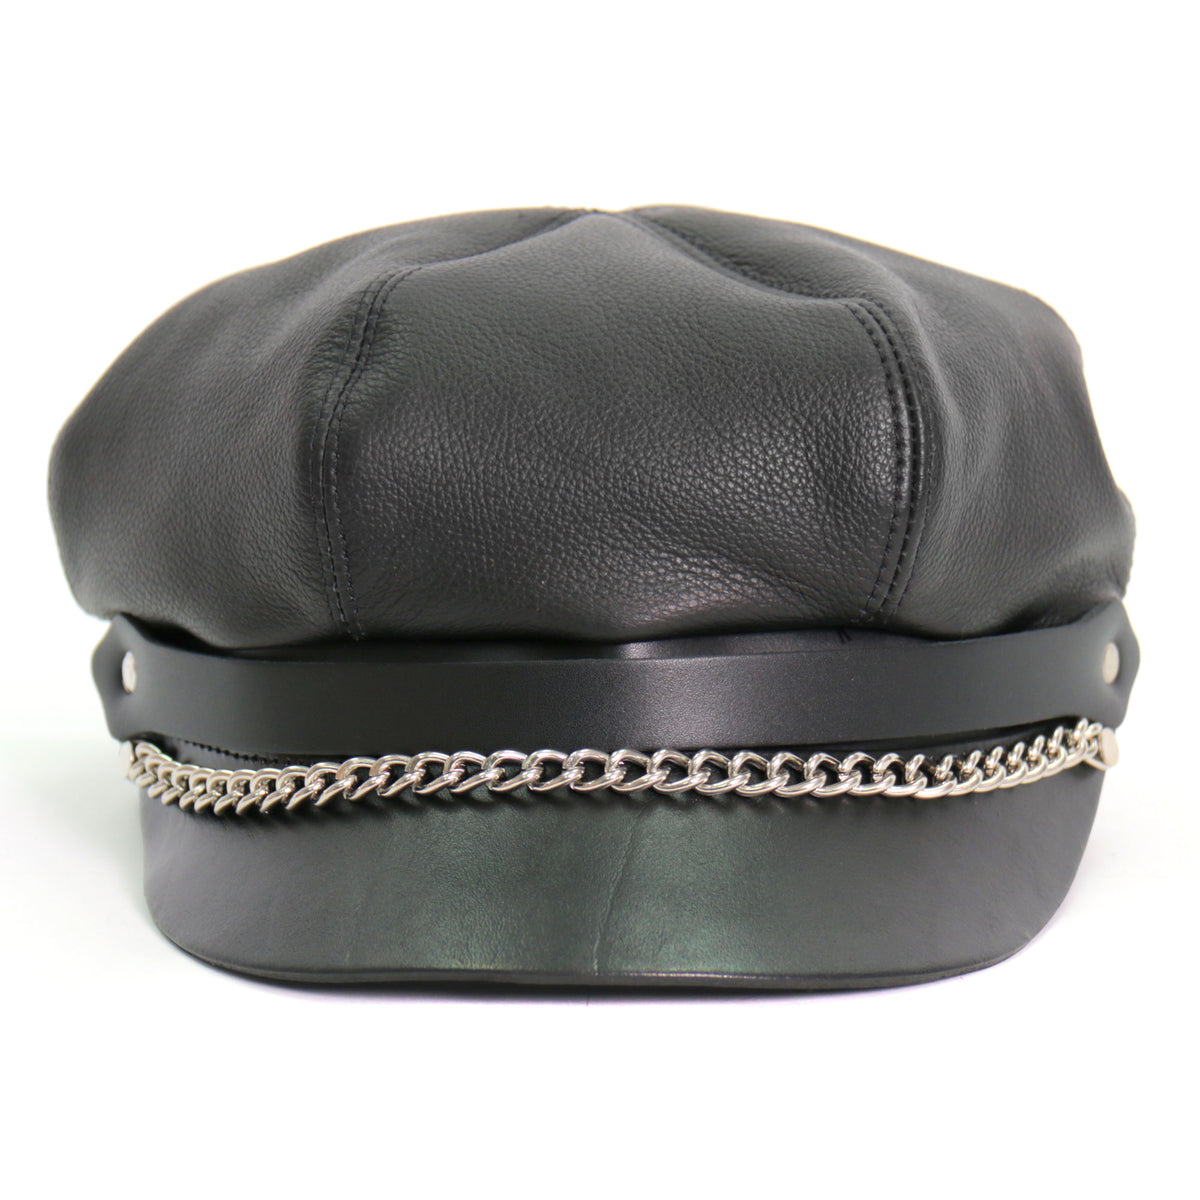 Hot Leathers Leather Section Pie Top Cap